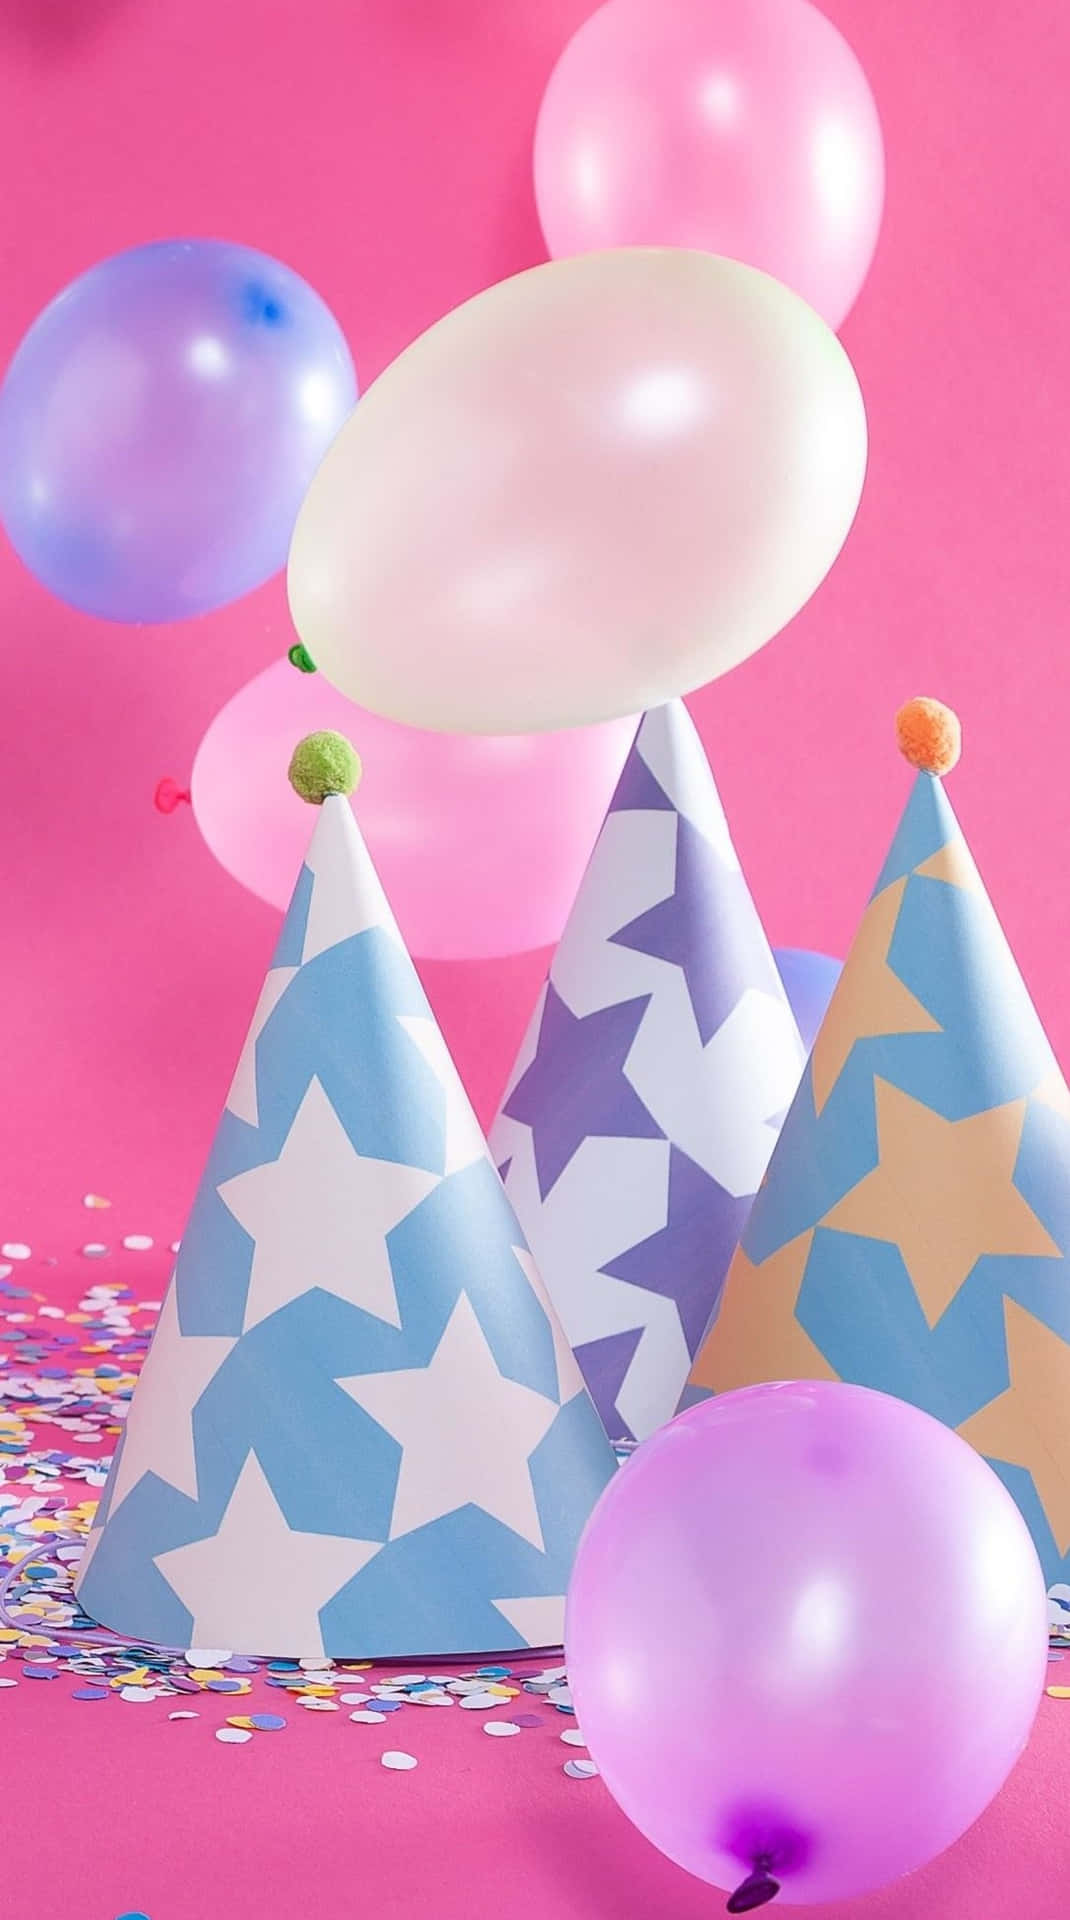 Celebrate a Special Day With a Pink Birthday Wallpaper